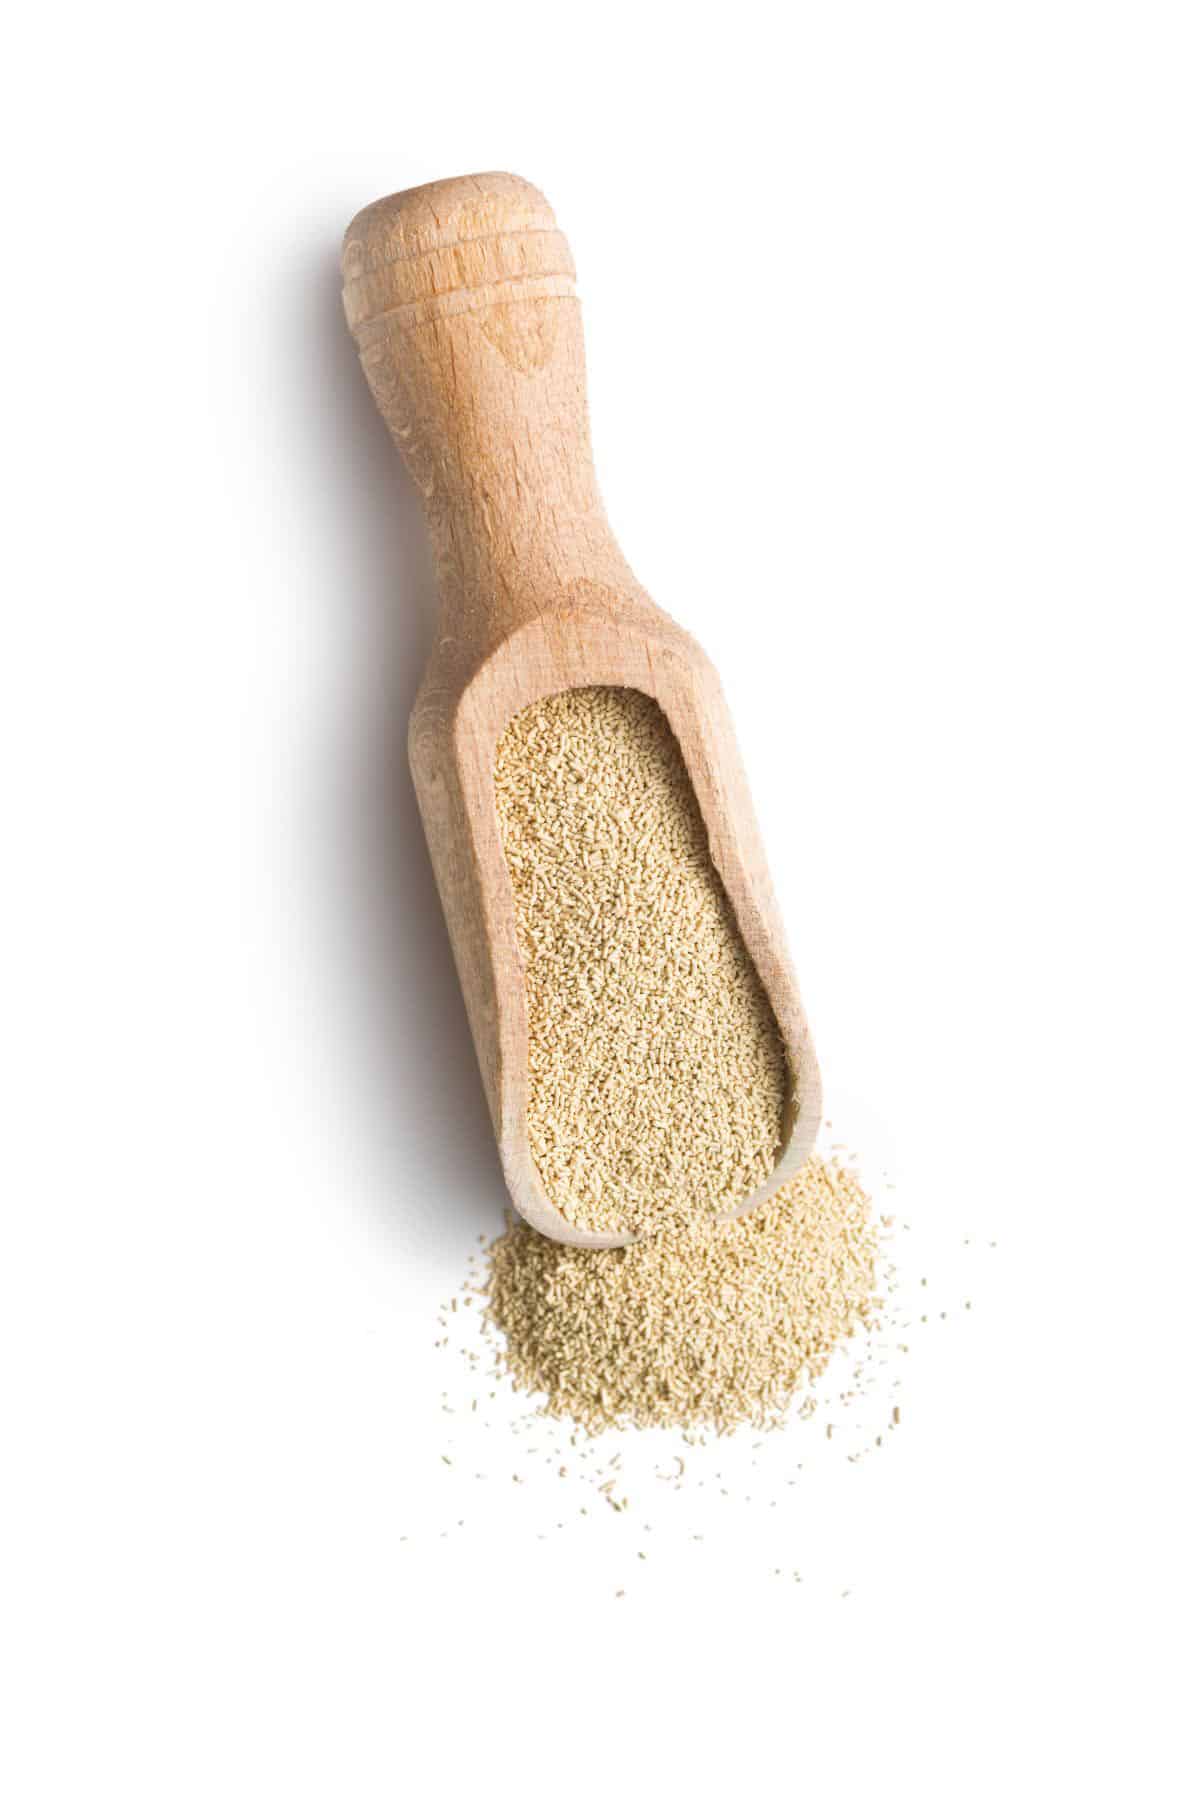 dry yeast in a wooden spoon.